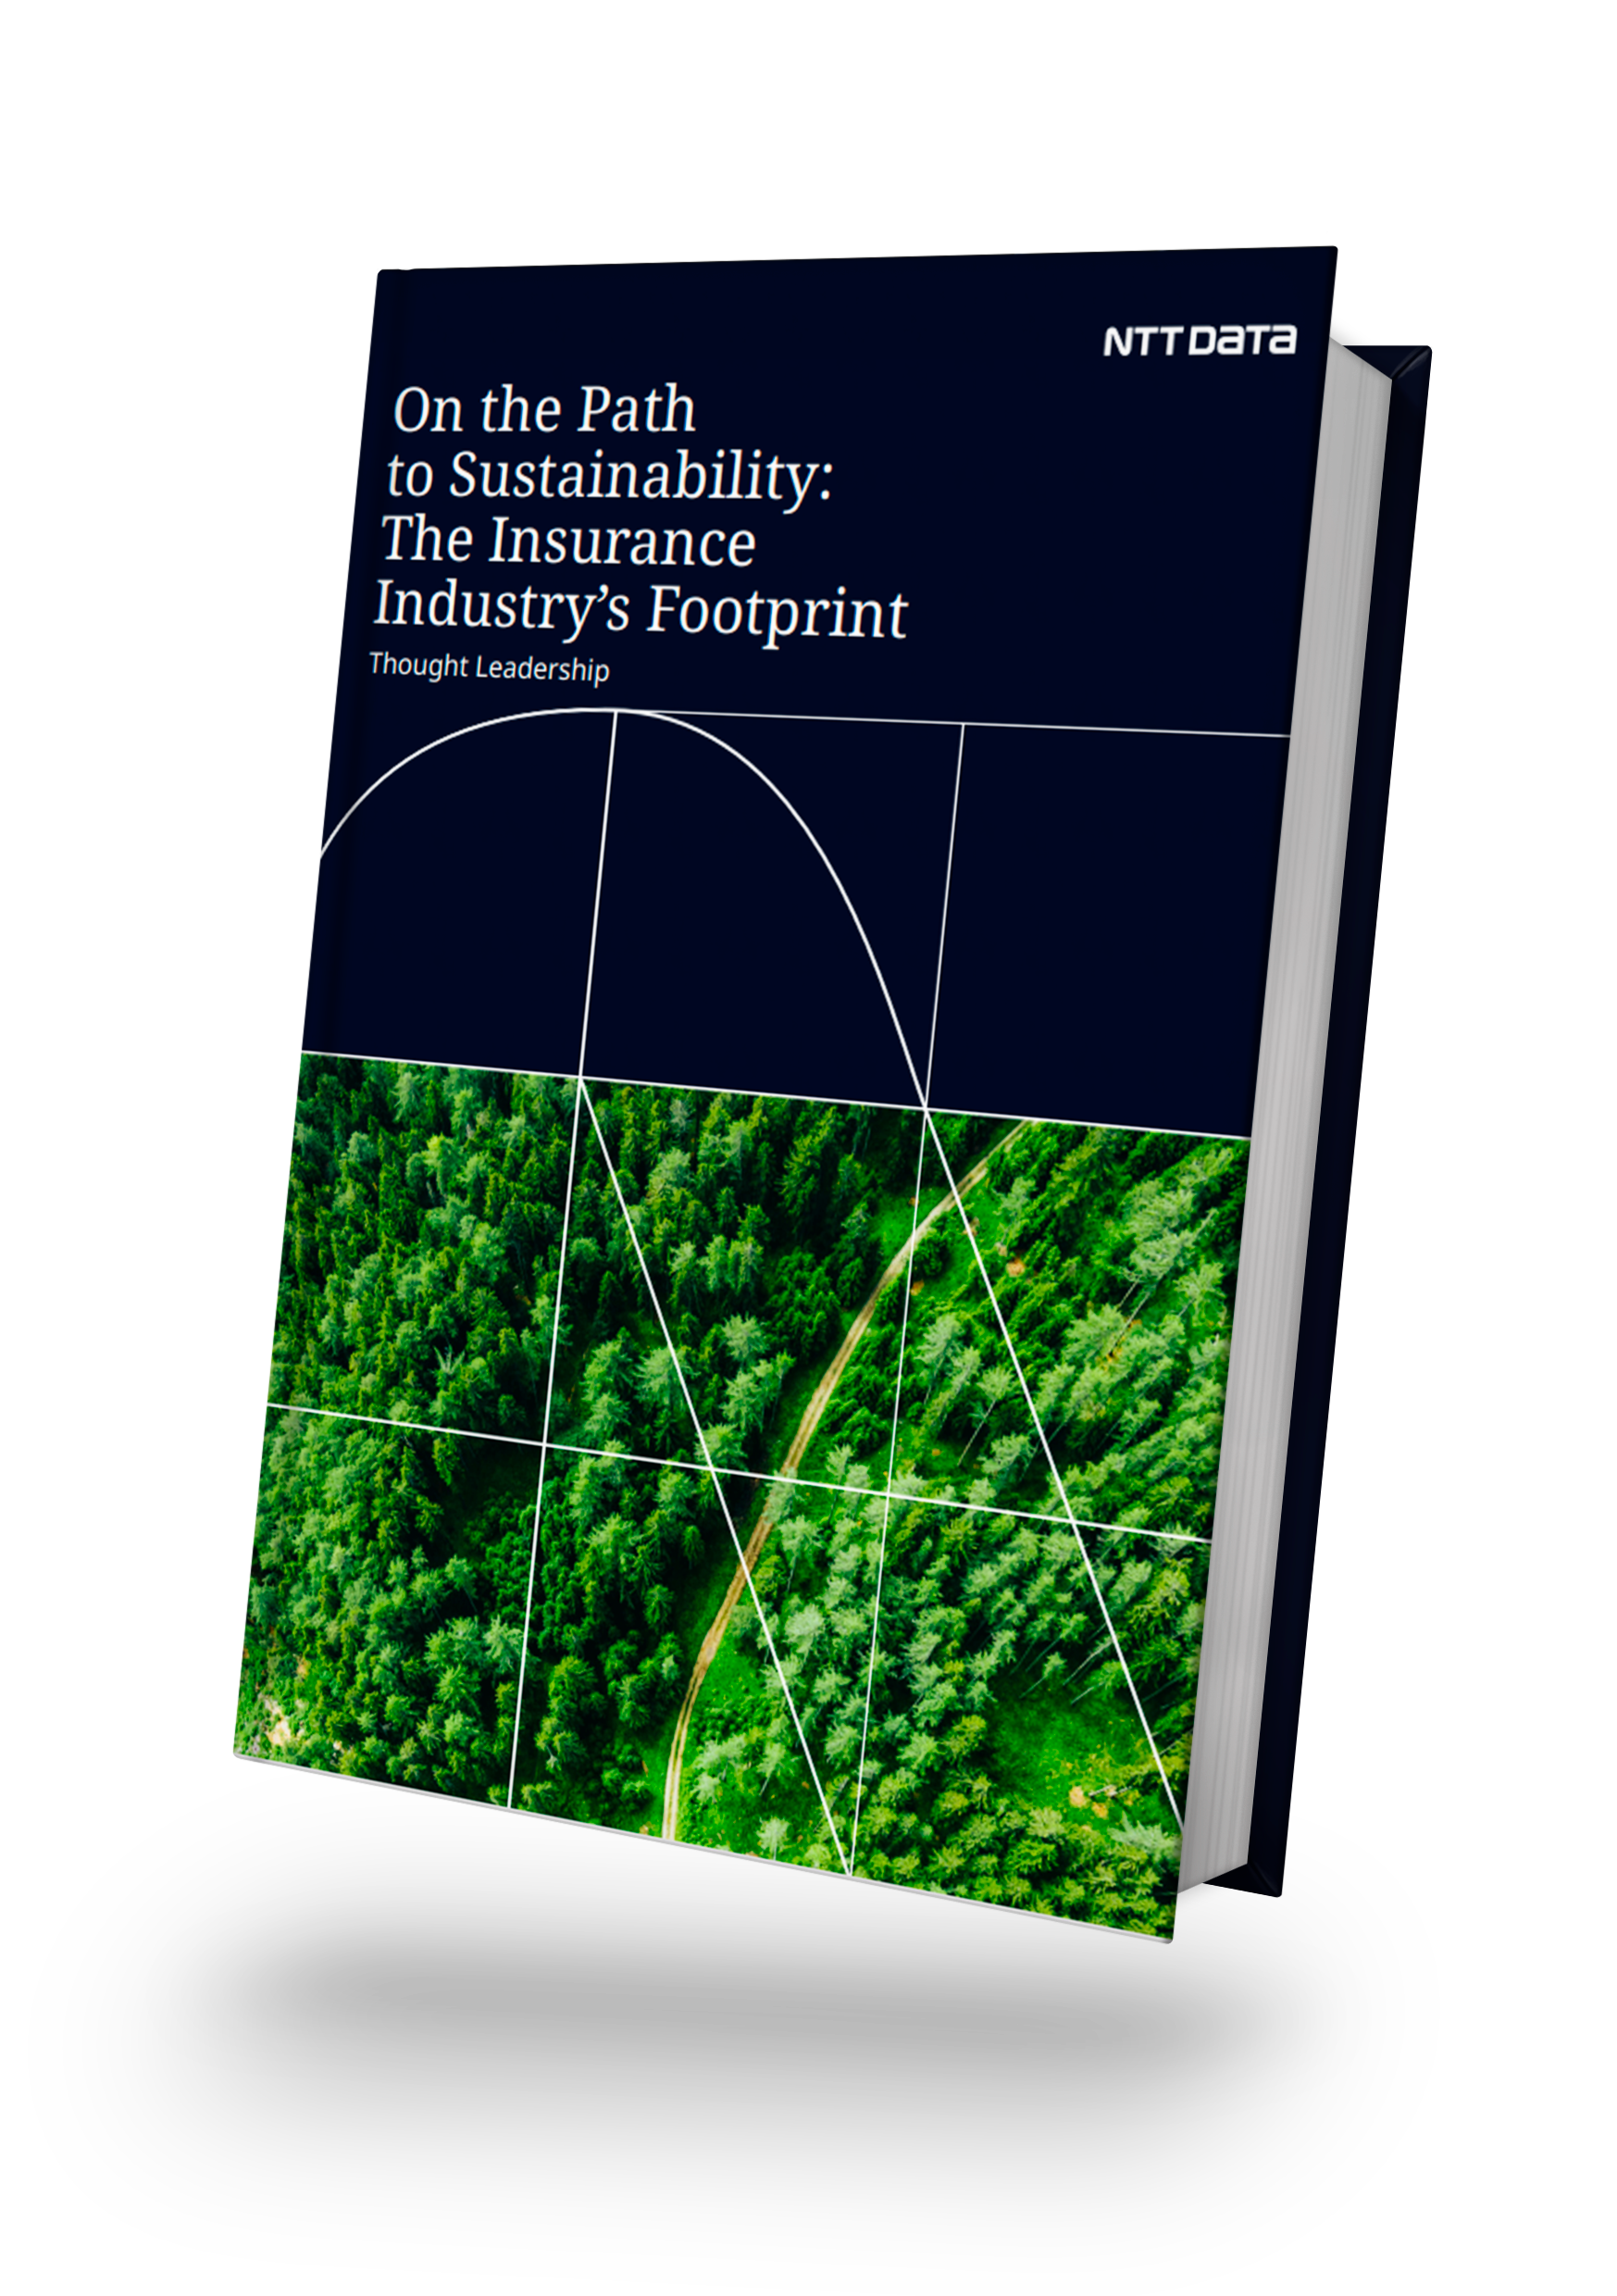 On the Path to Sustainability: The Insurance Industry's Footprint